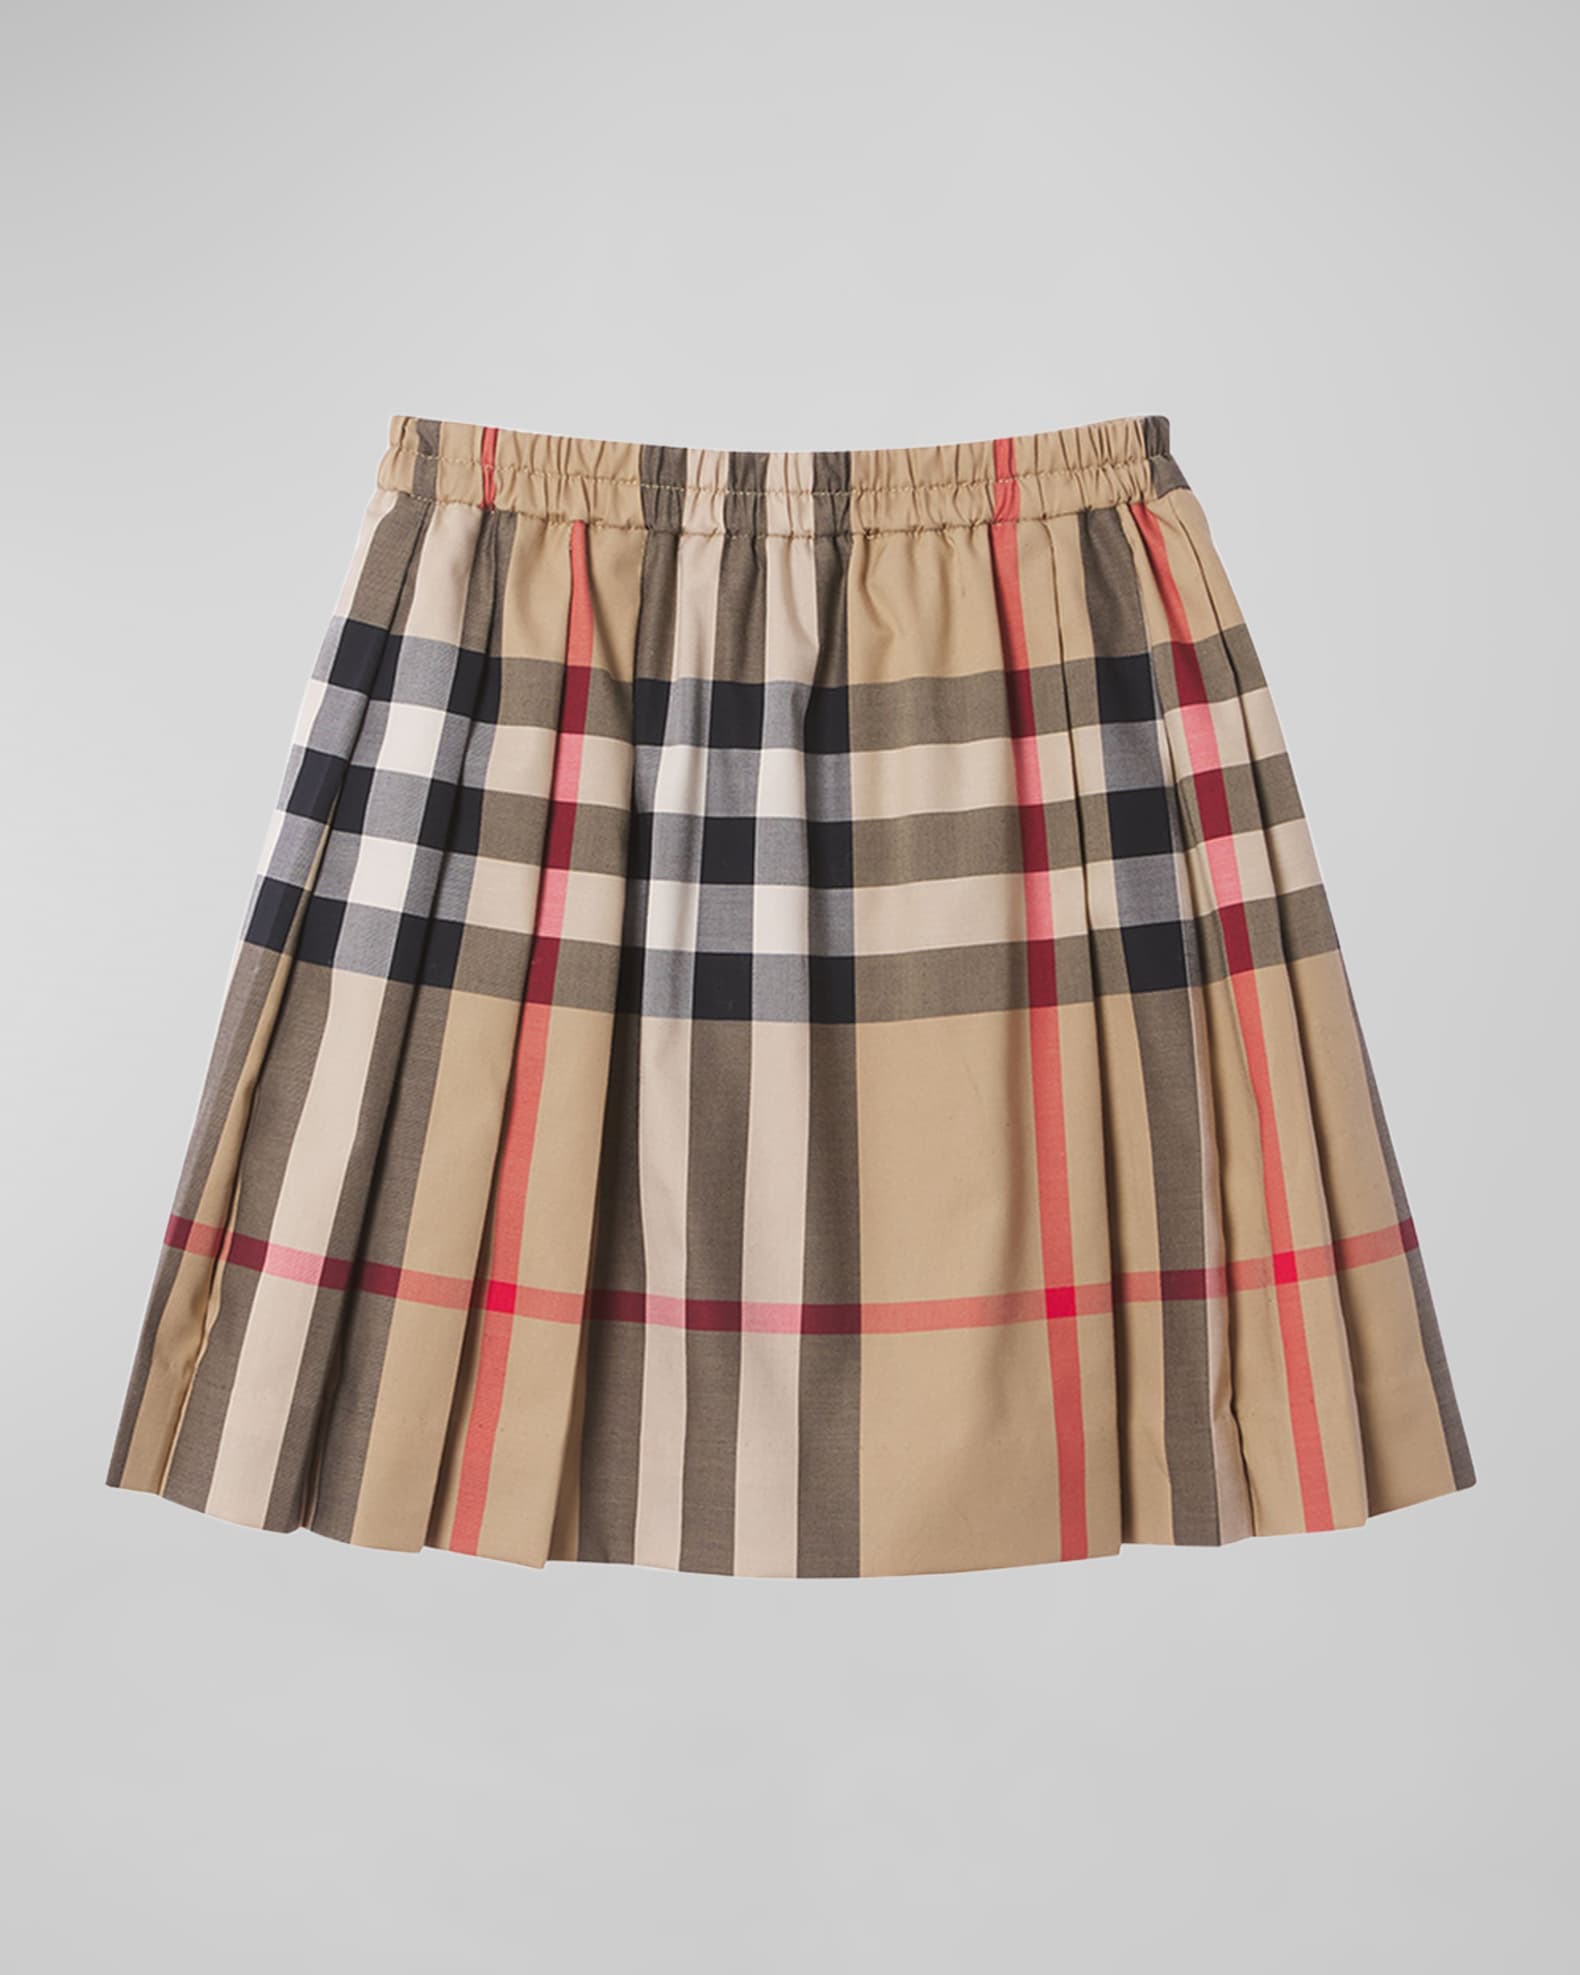 Burberry Girl's Hilde Pleated Vintage Check Skirt, Size 3-14 | Neiman Marcus